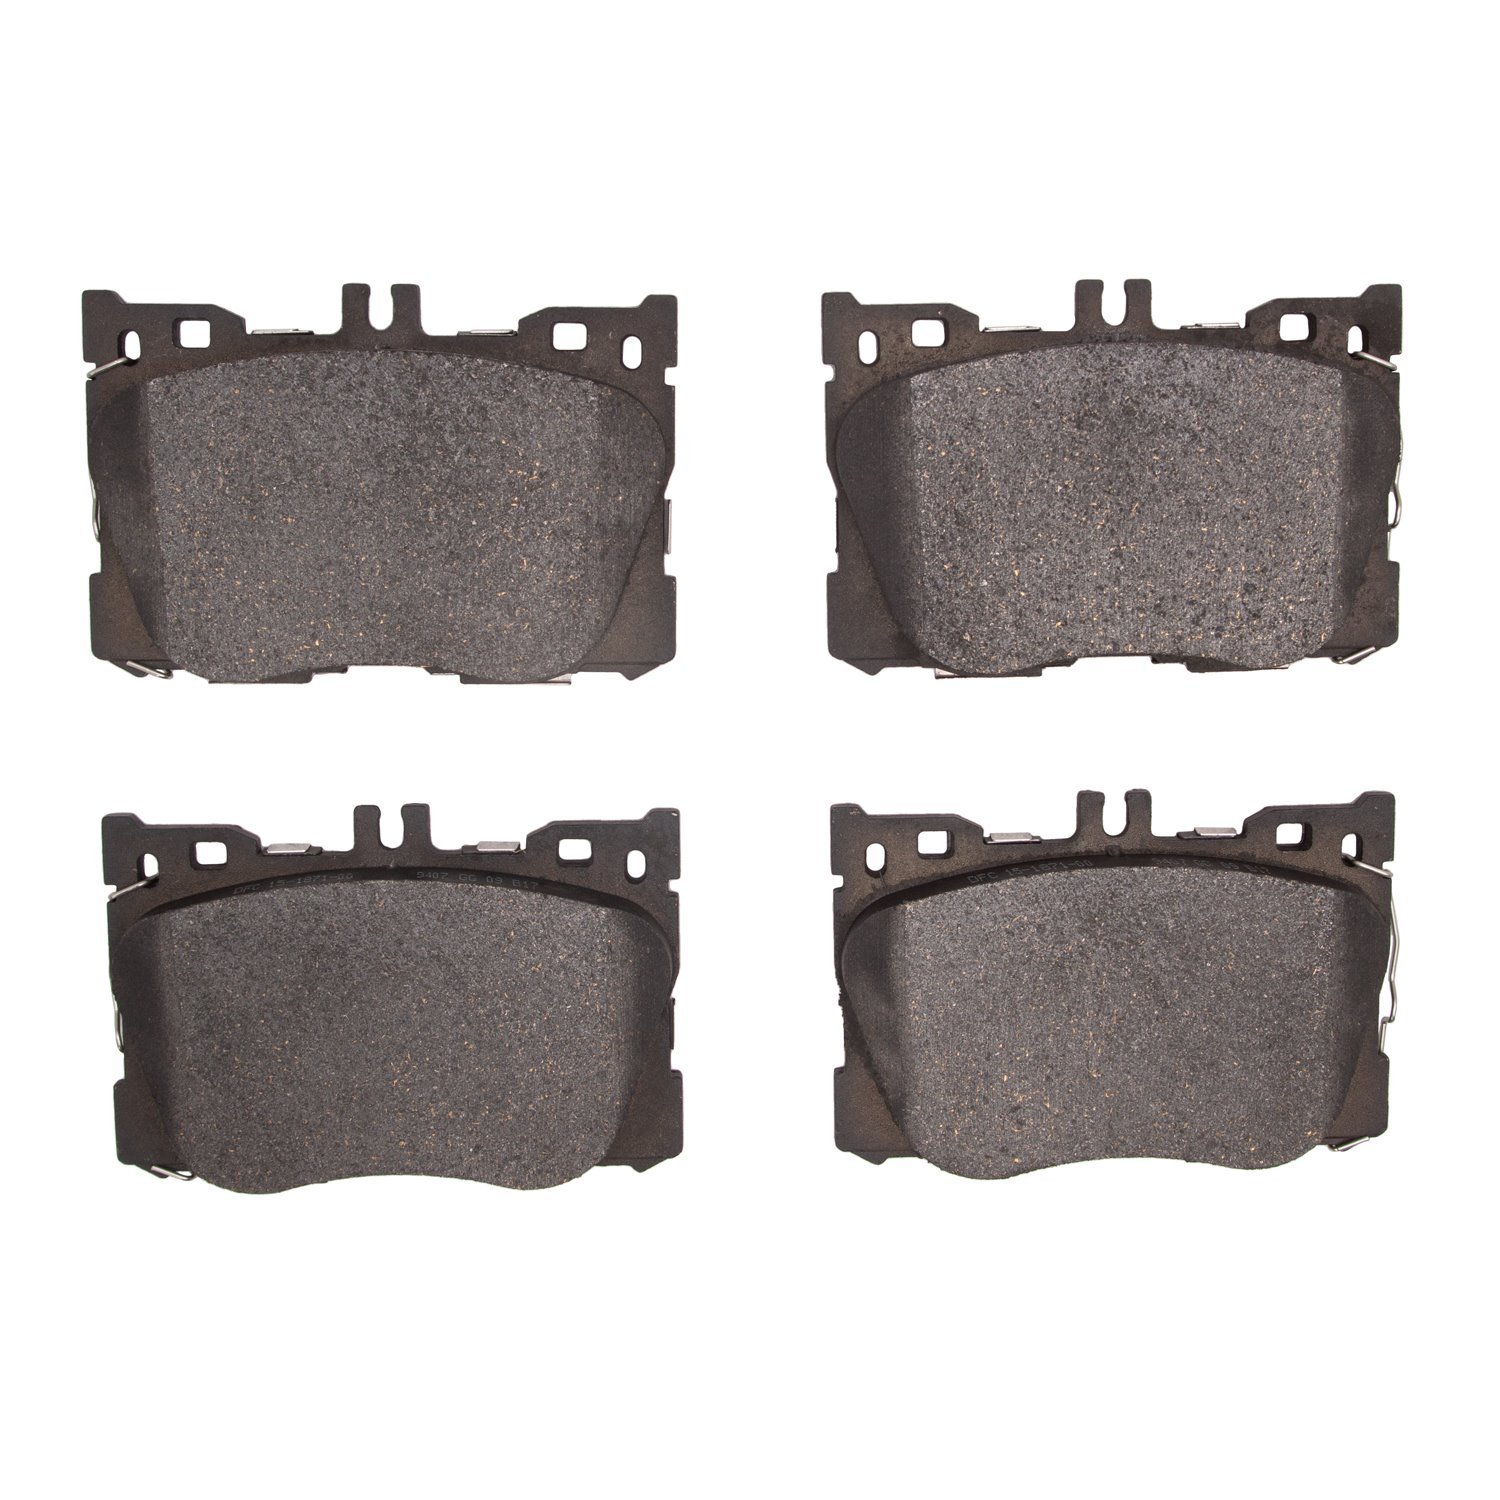 1310-1871-00 3000-Series Ceramic Brake Pads, Fits Select Mercedes-Benz, Position: Front